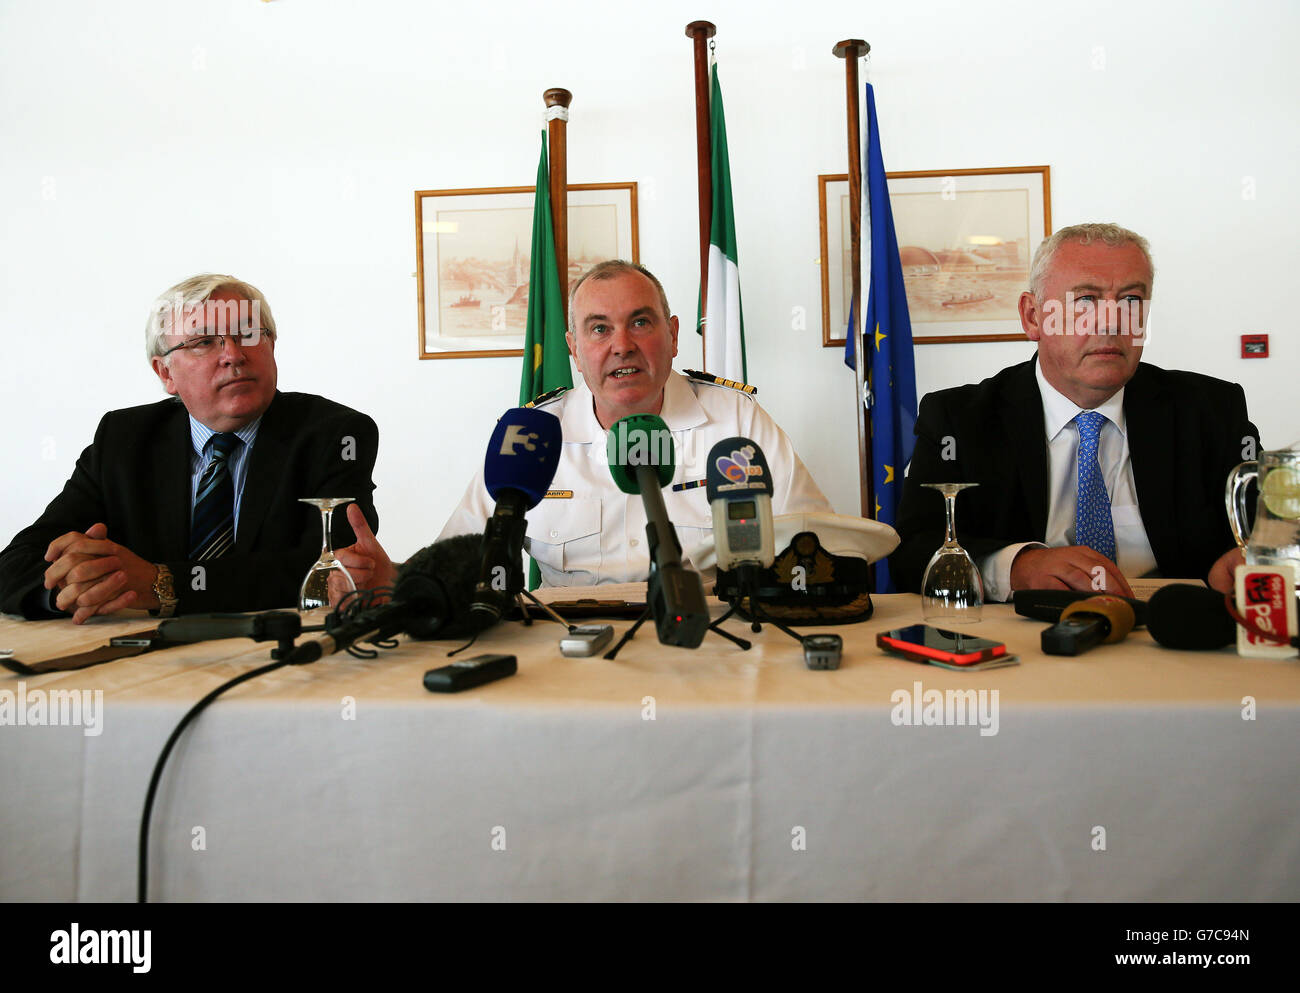 (left to right) Customs Commisioner Liam Irwin, Officer Comanding Naval Operations Commander Capt David Barry and Assistant Garda Commisioner John O'Mahoney, speaking to the media following the apprehension of the yacht Makayabella which is being held in Haulbowline naval base, Cobh, Co Cork after the Irish Navy intercepted the vessel suspected of carrying around 80 million euro (&pound;62.5 million) worth of cocaine 200 nautical miles off Mizen Head. Stock Photo